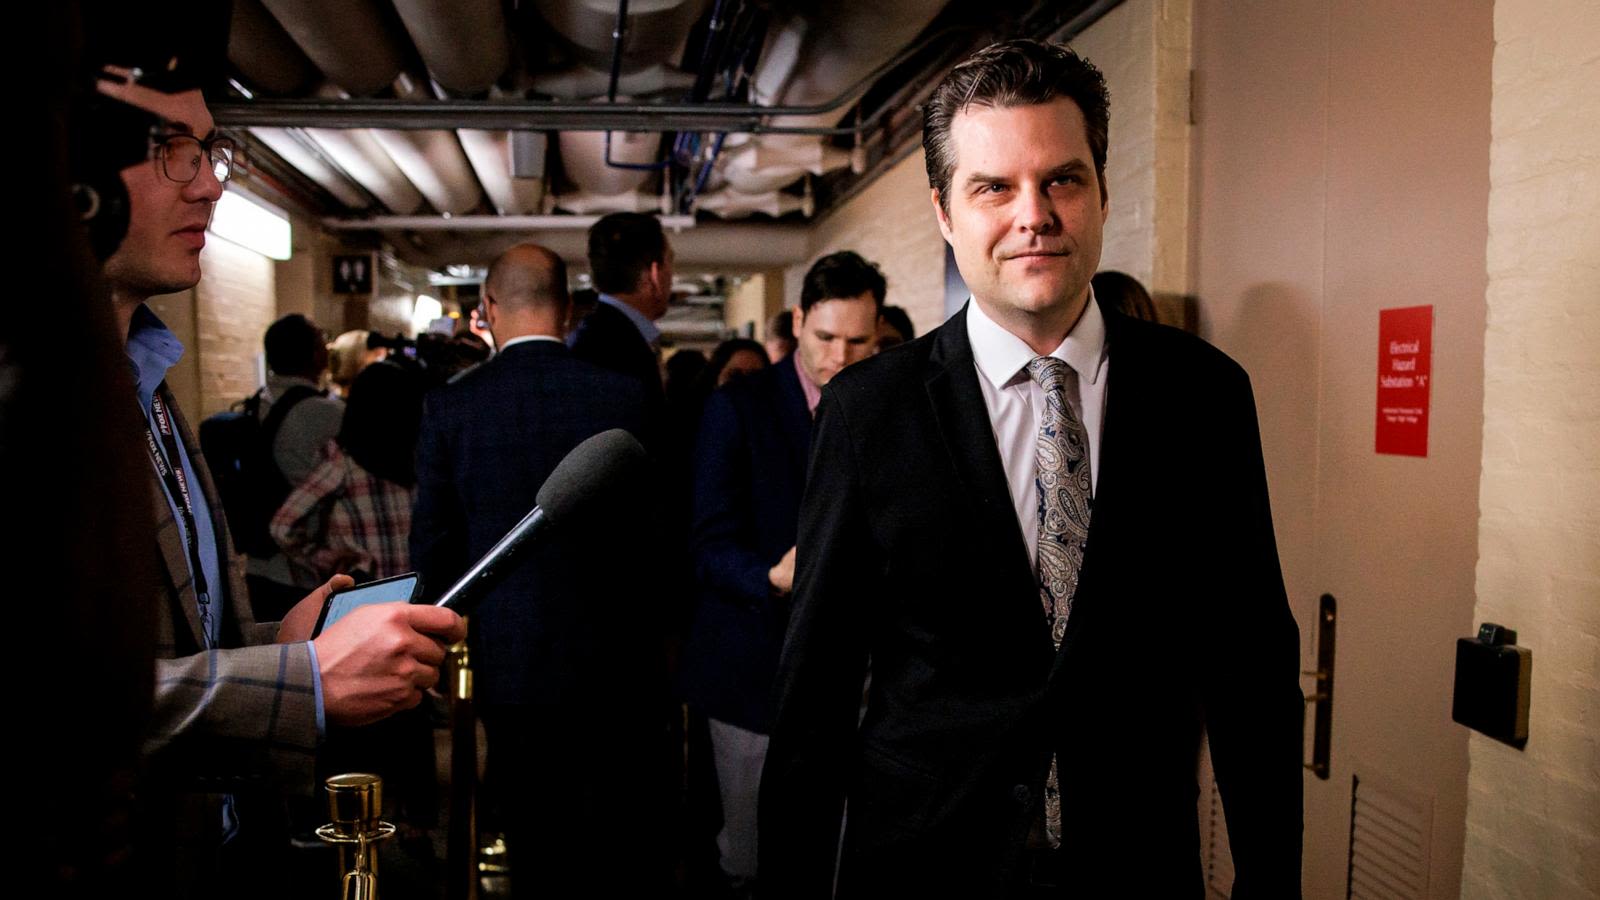 Matt Gaetz attended 2017 party where minor and drugs were present, woman's sworn statement obtained by Congress claims